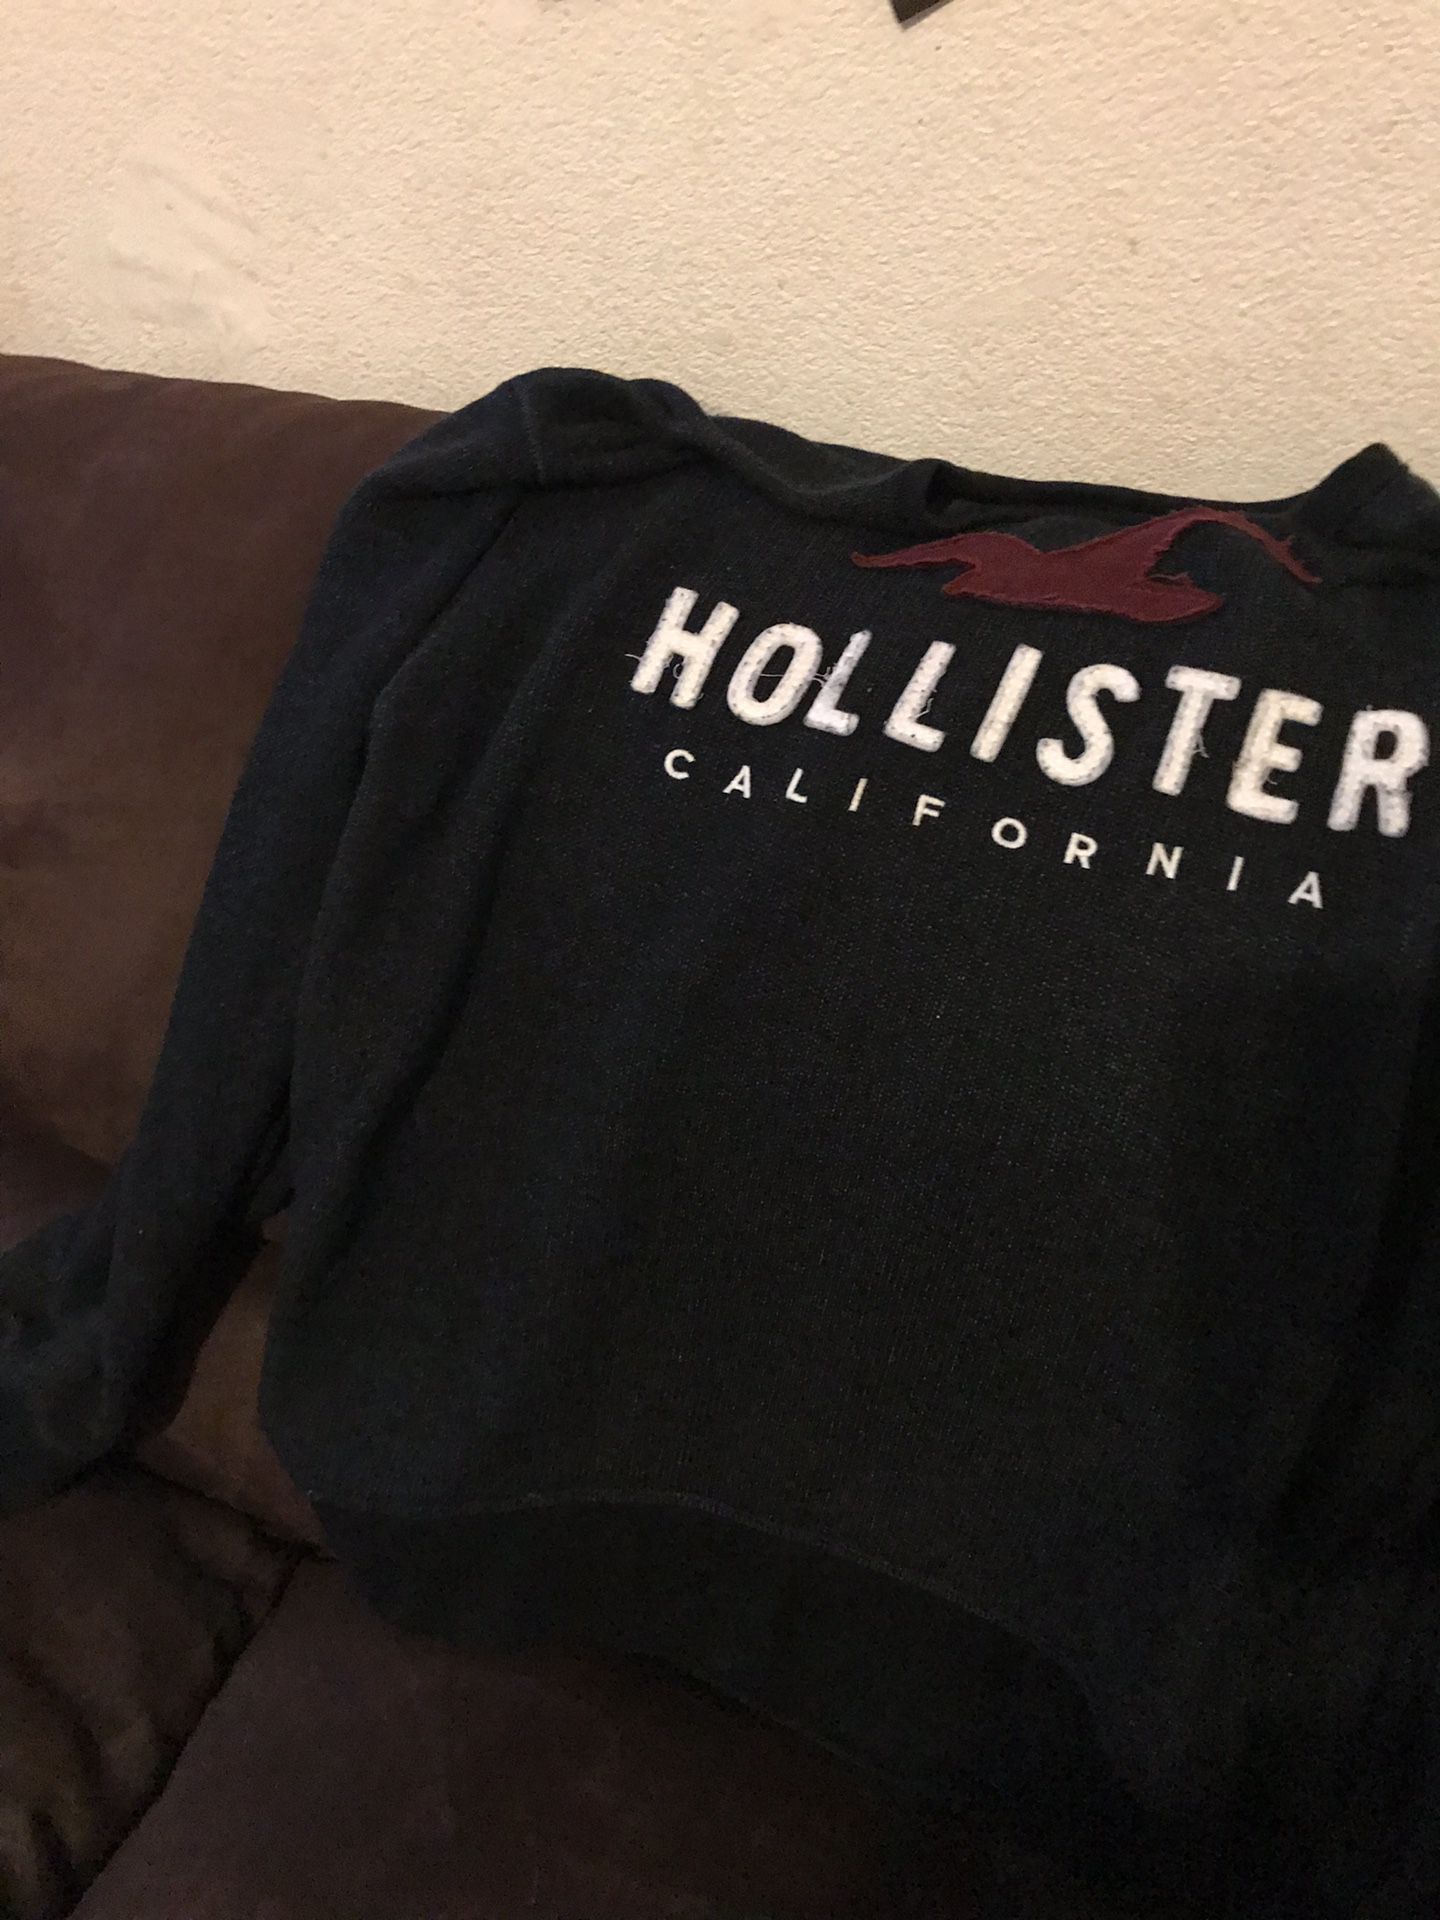 2 HOLLISTER MEN SWEATERS SIZE XL THE BLUE ONE ONLY WORN ONCE AND THE RED ONE IS NEW WITH TAGS ASKIN $35 FOR BOTH